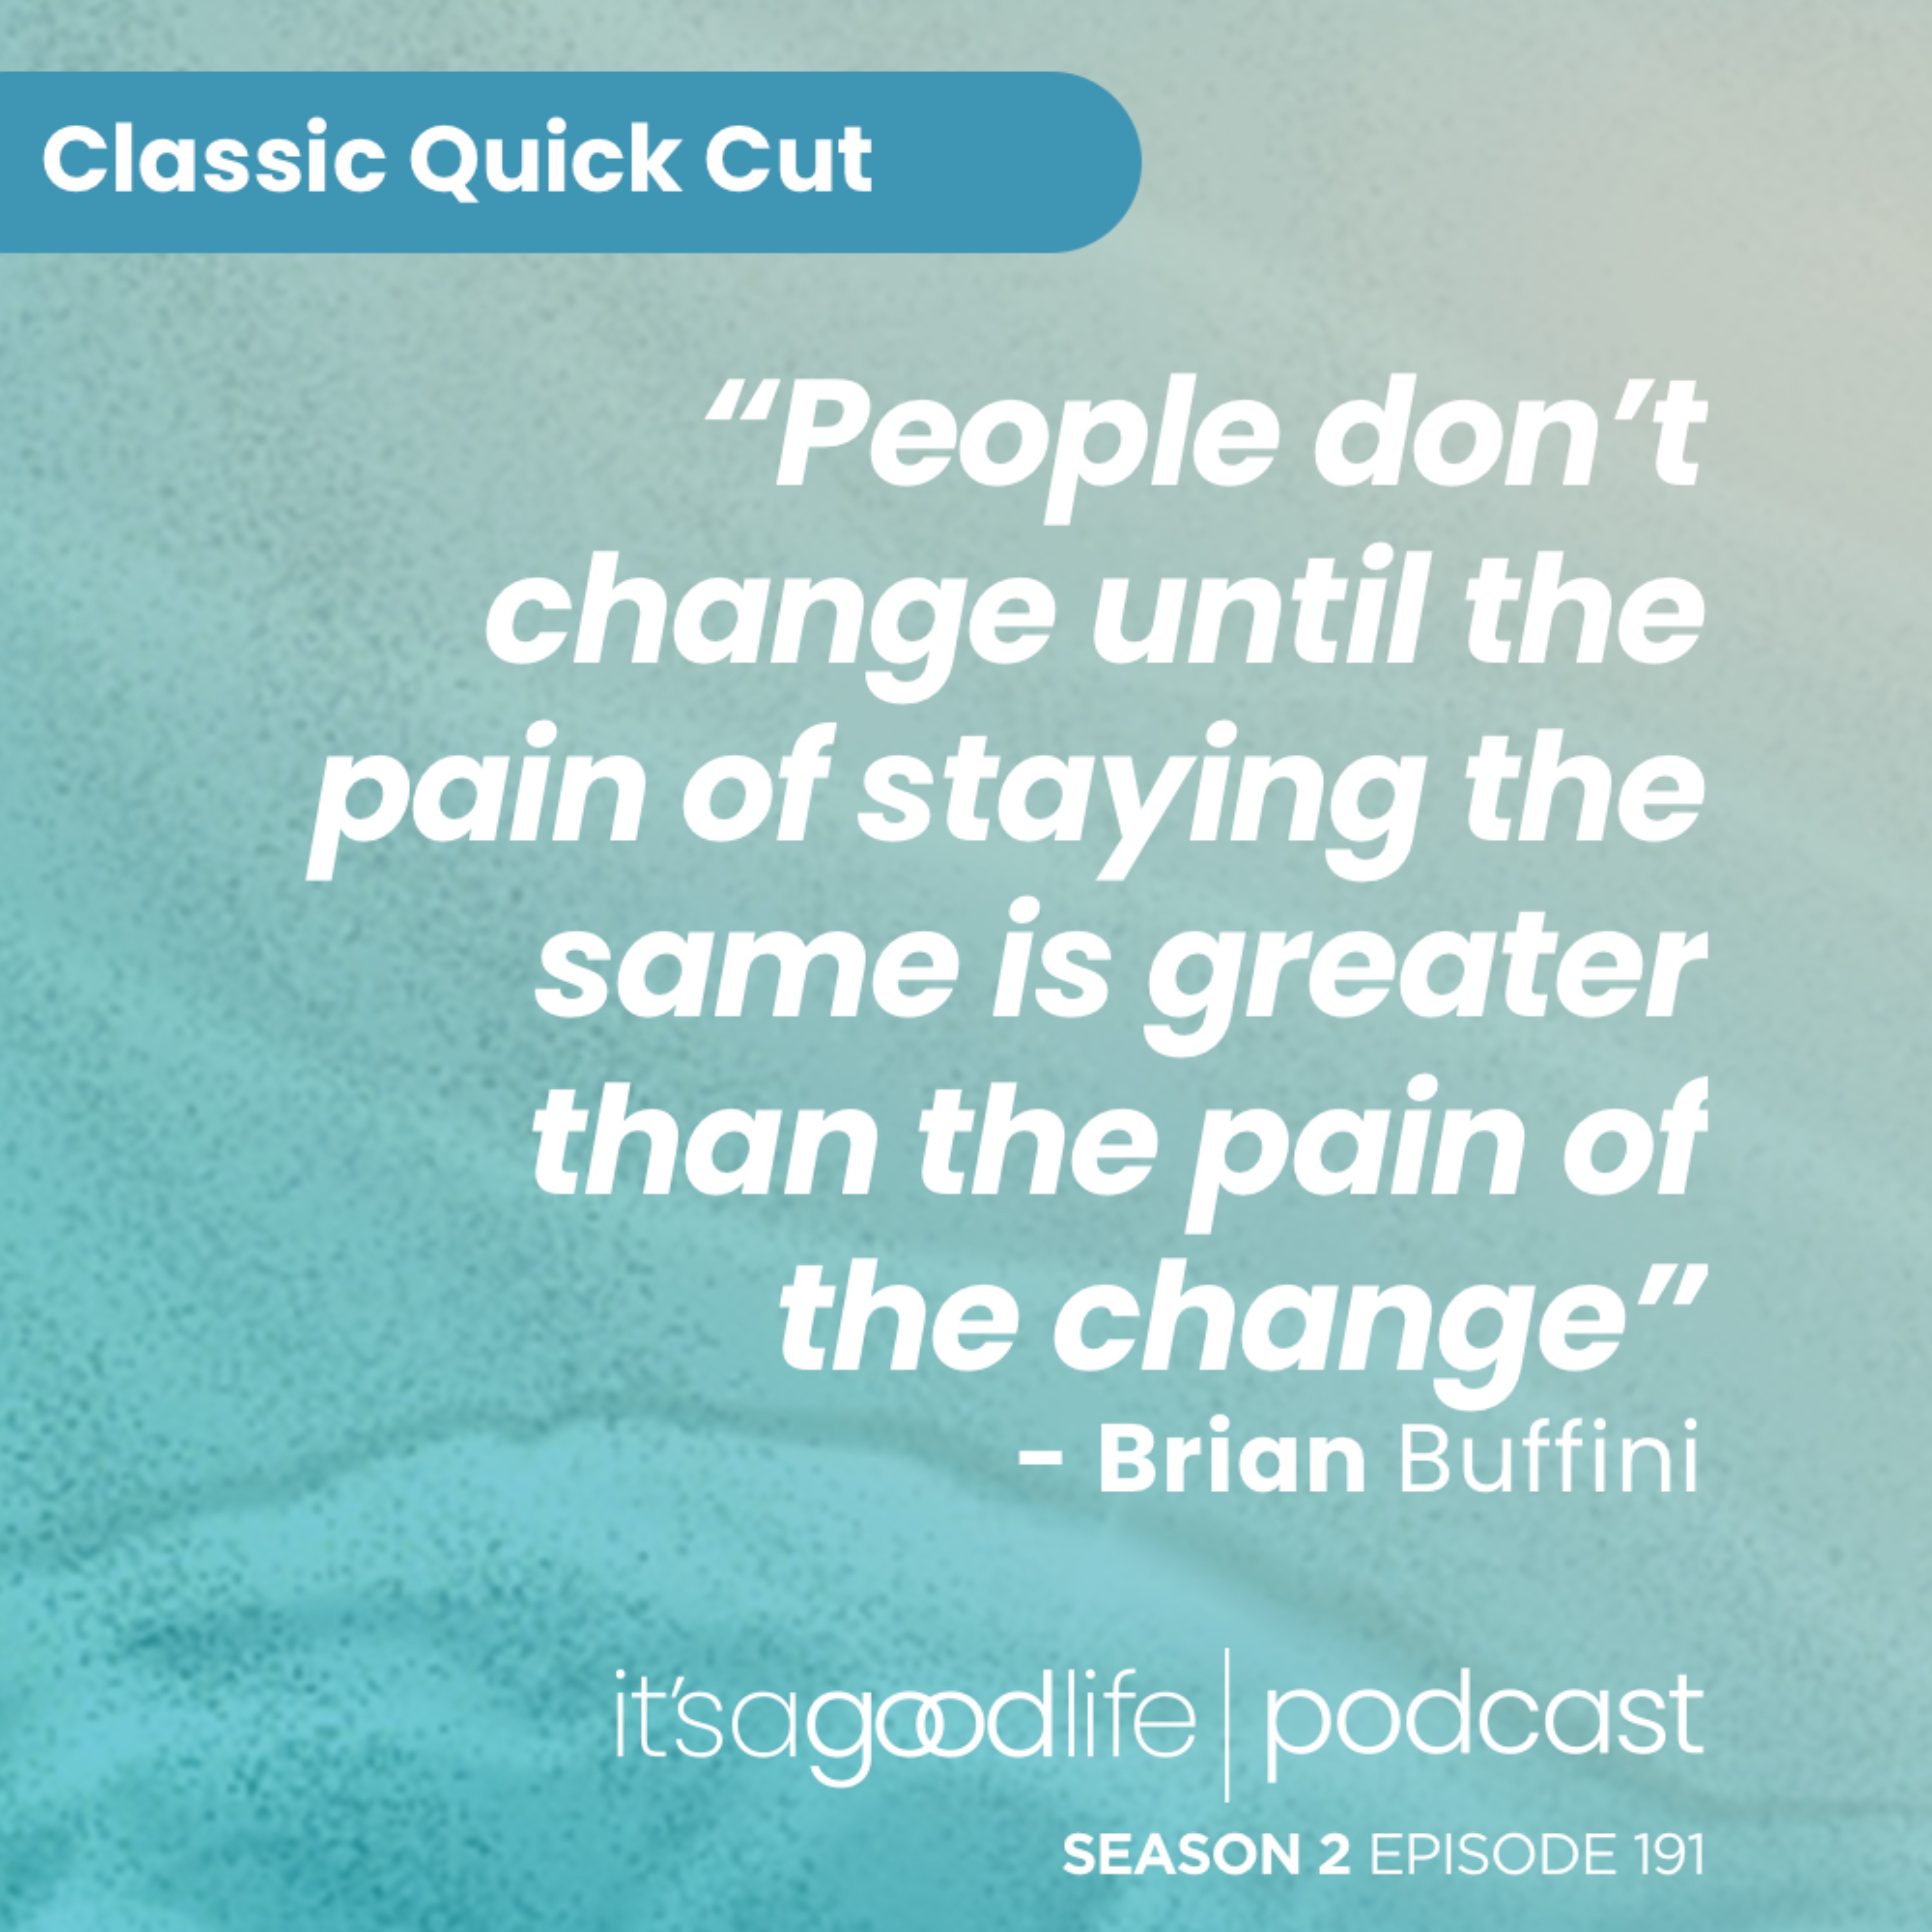 Quick Cut: S2E191 How to Change Your Life Once & for All